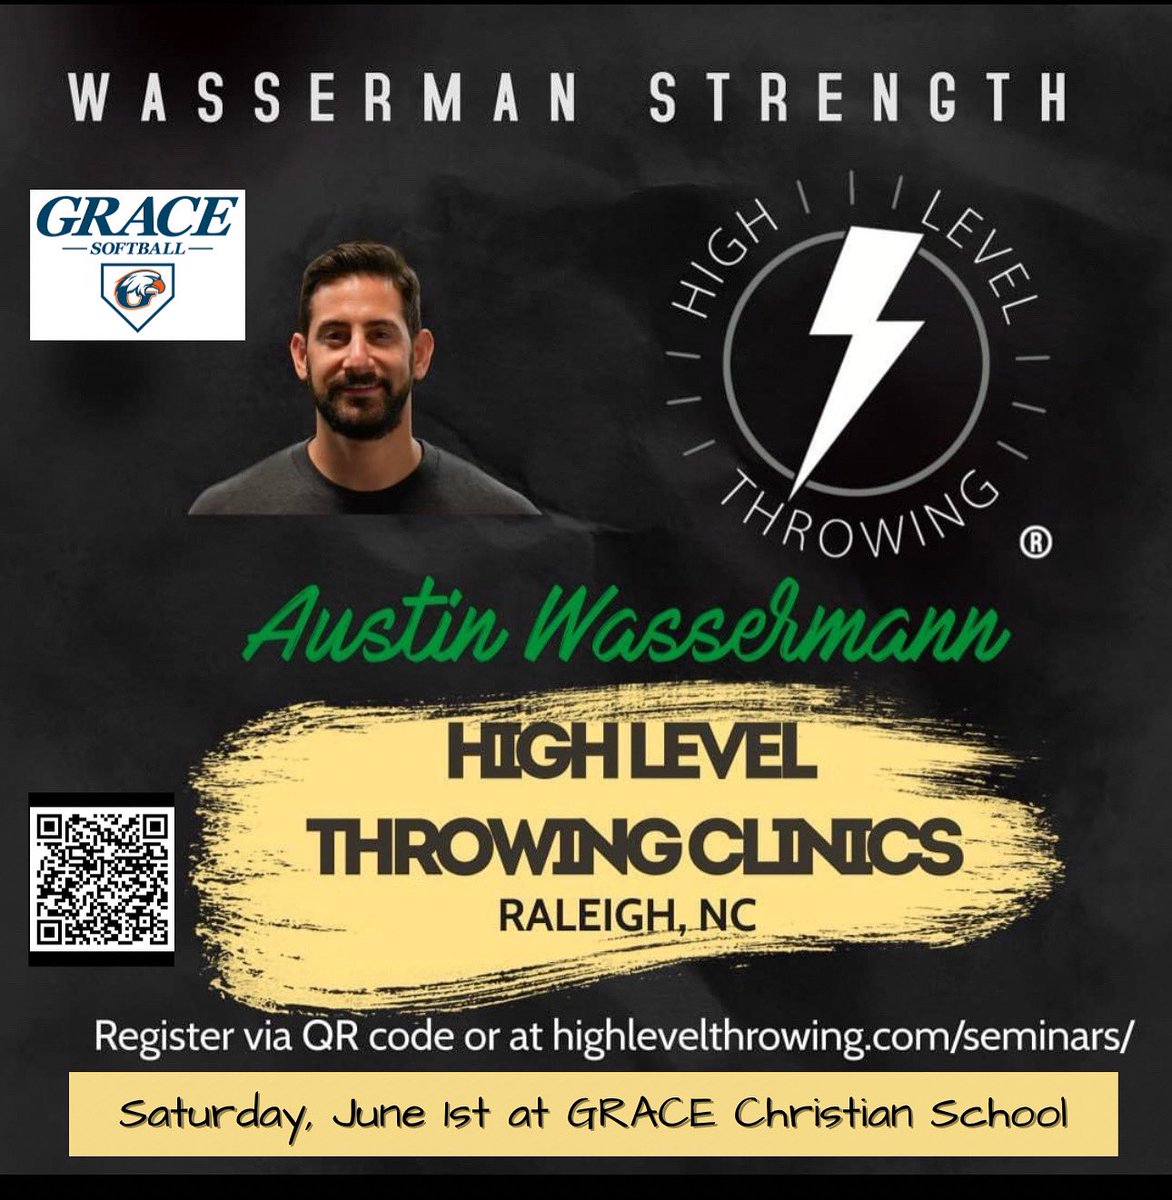 Super excited to share that we will be hosting @Wass_Strength High Level Throwing Clinic here on campus on June 1st! Austin and crew put on a phenomenal clinic that helps athletes of all ages improve their throwing mechanics, velocity, and arm care. Jump on this ASAP!